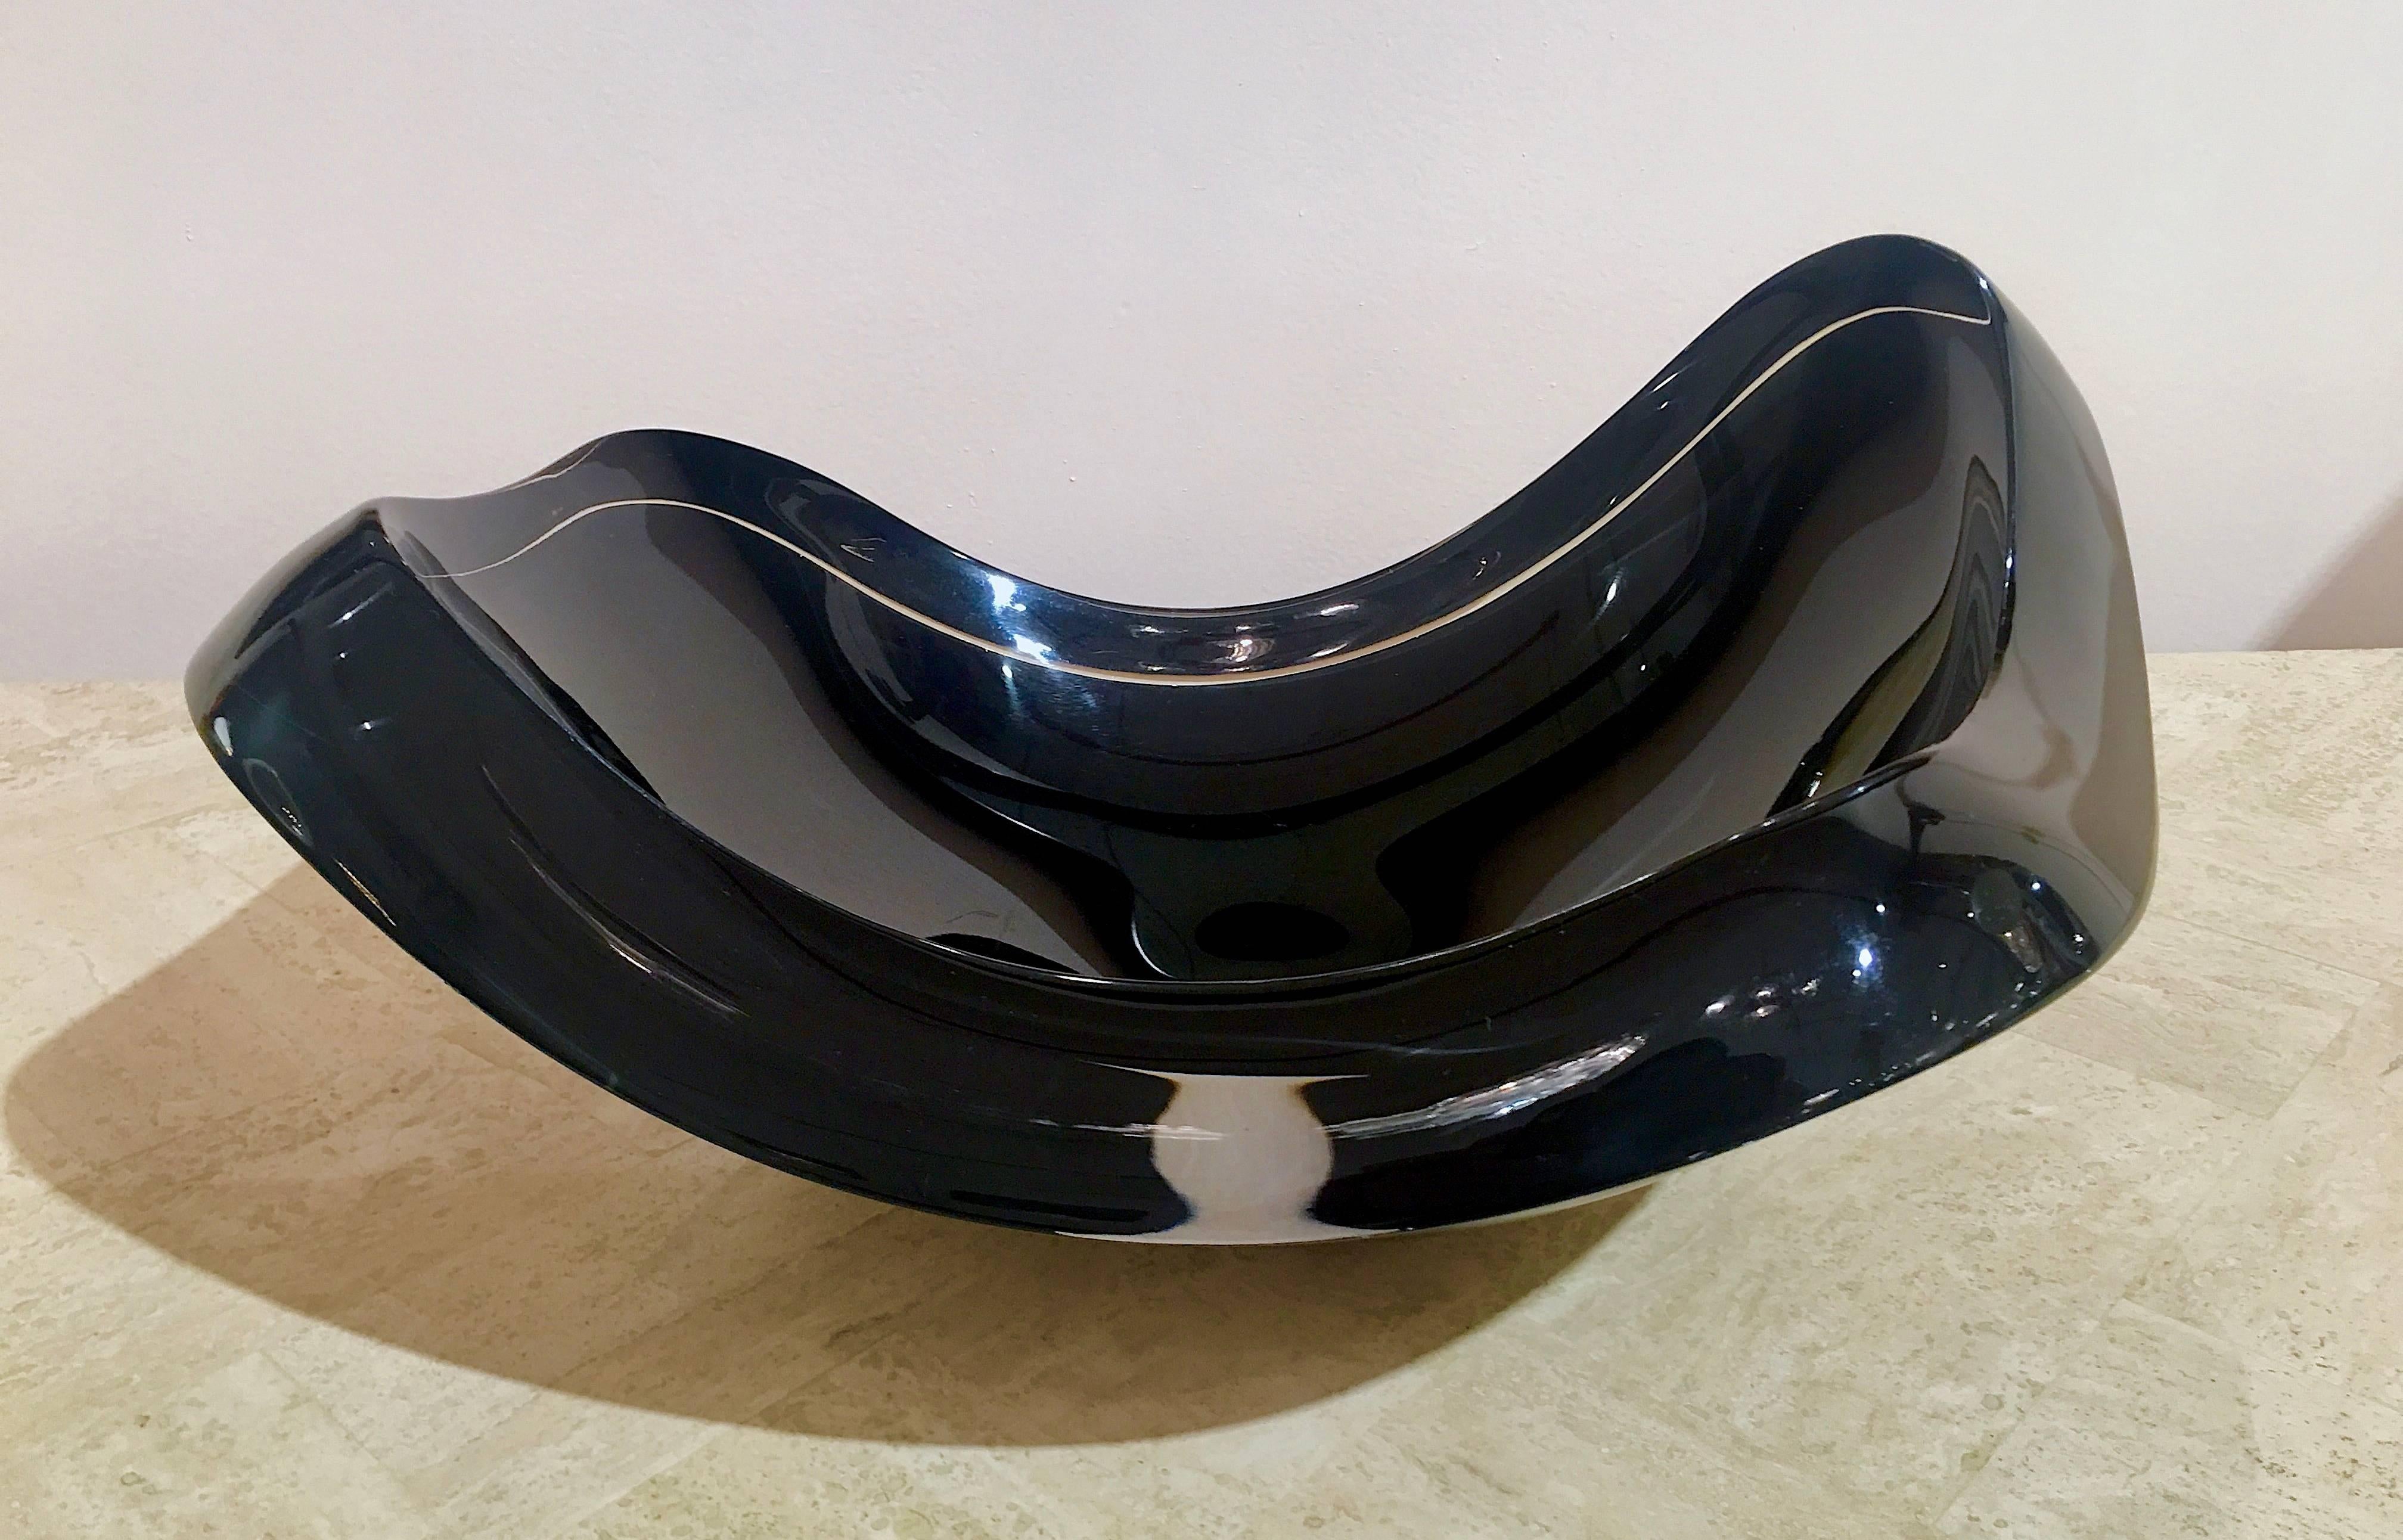 American Black Lucite Sculptural Centrepiece or Bowl by Ritts Co.